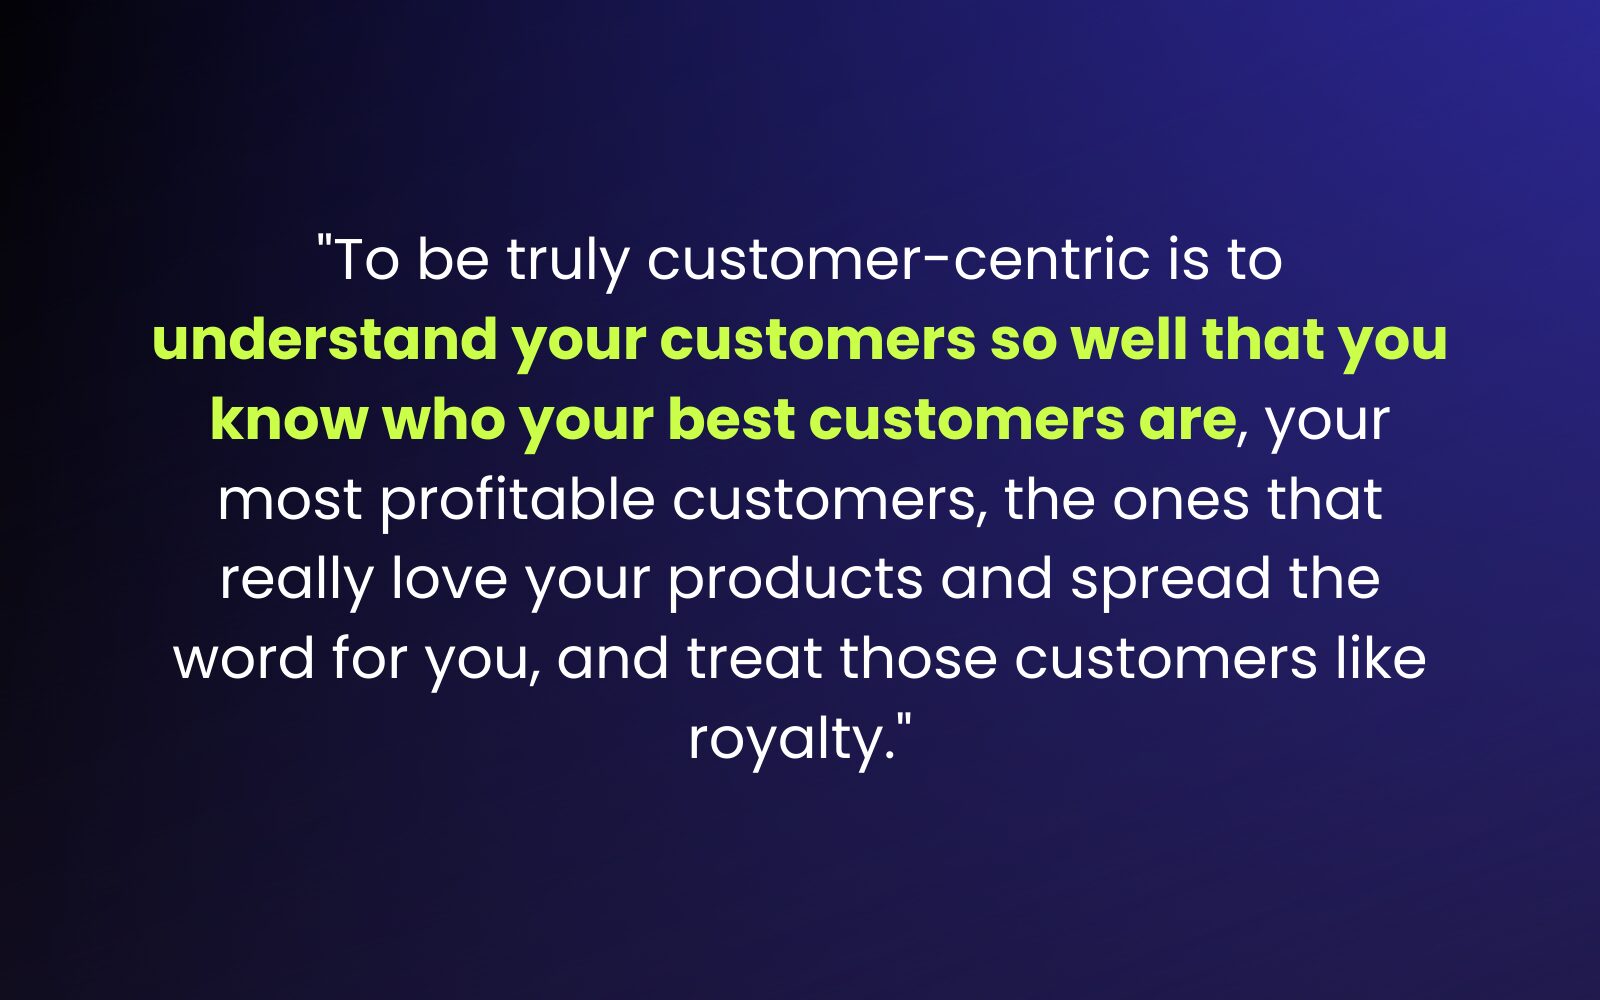 "To be truly customer-centric is to understand your customers so well that you know who your best customers are, your most profitable customers, the ones that really love your products and spread the word for you, and treat those customers like royalty." - How to Build Brand Loyalty